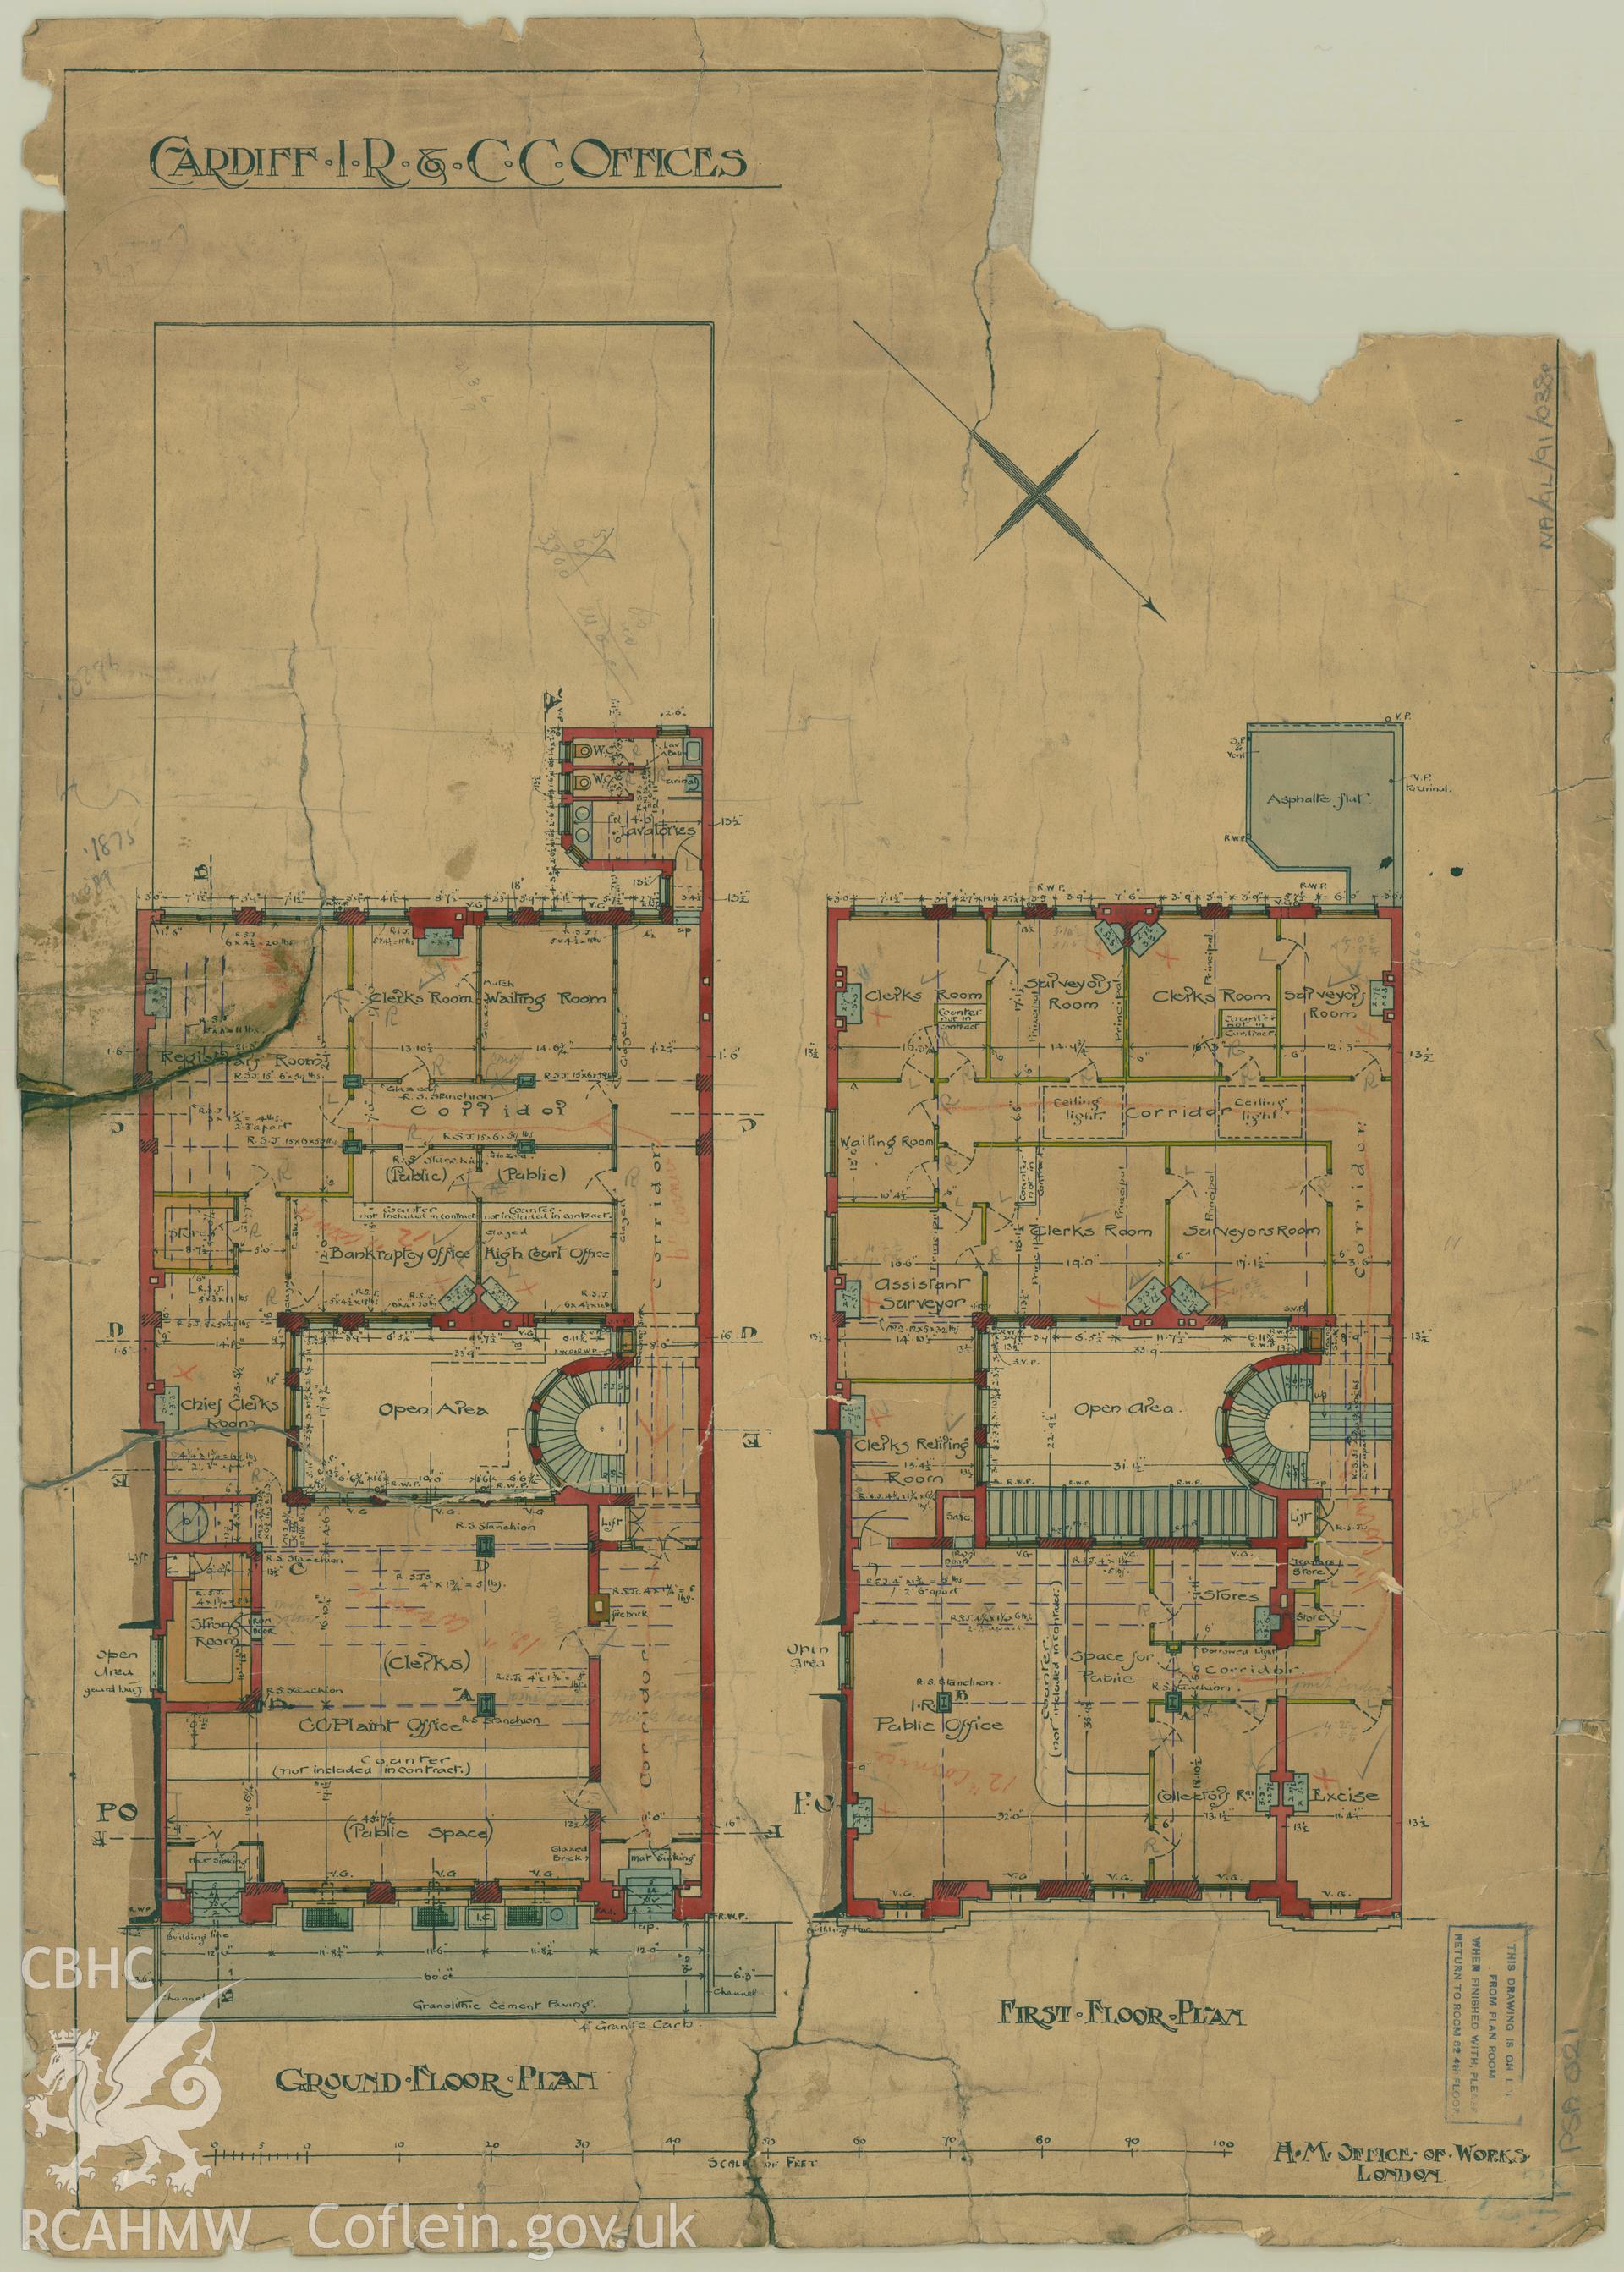 Cardiff Inland Revenue and County Court Offices; measured drawing showing ground and first floor plans, produced by H.M. Office of Works,  undated.